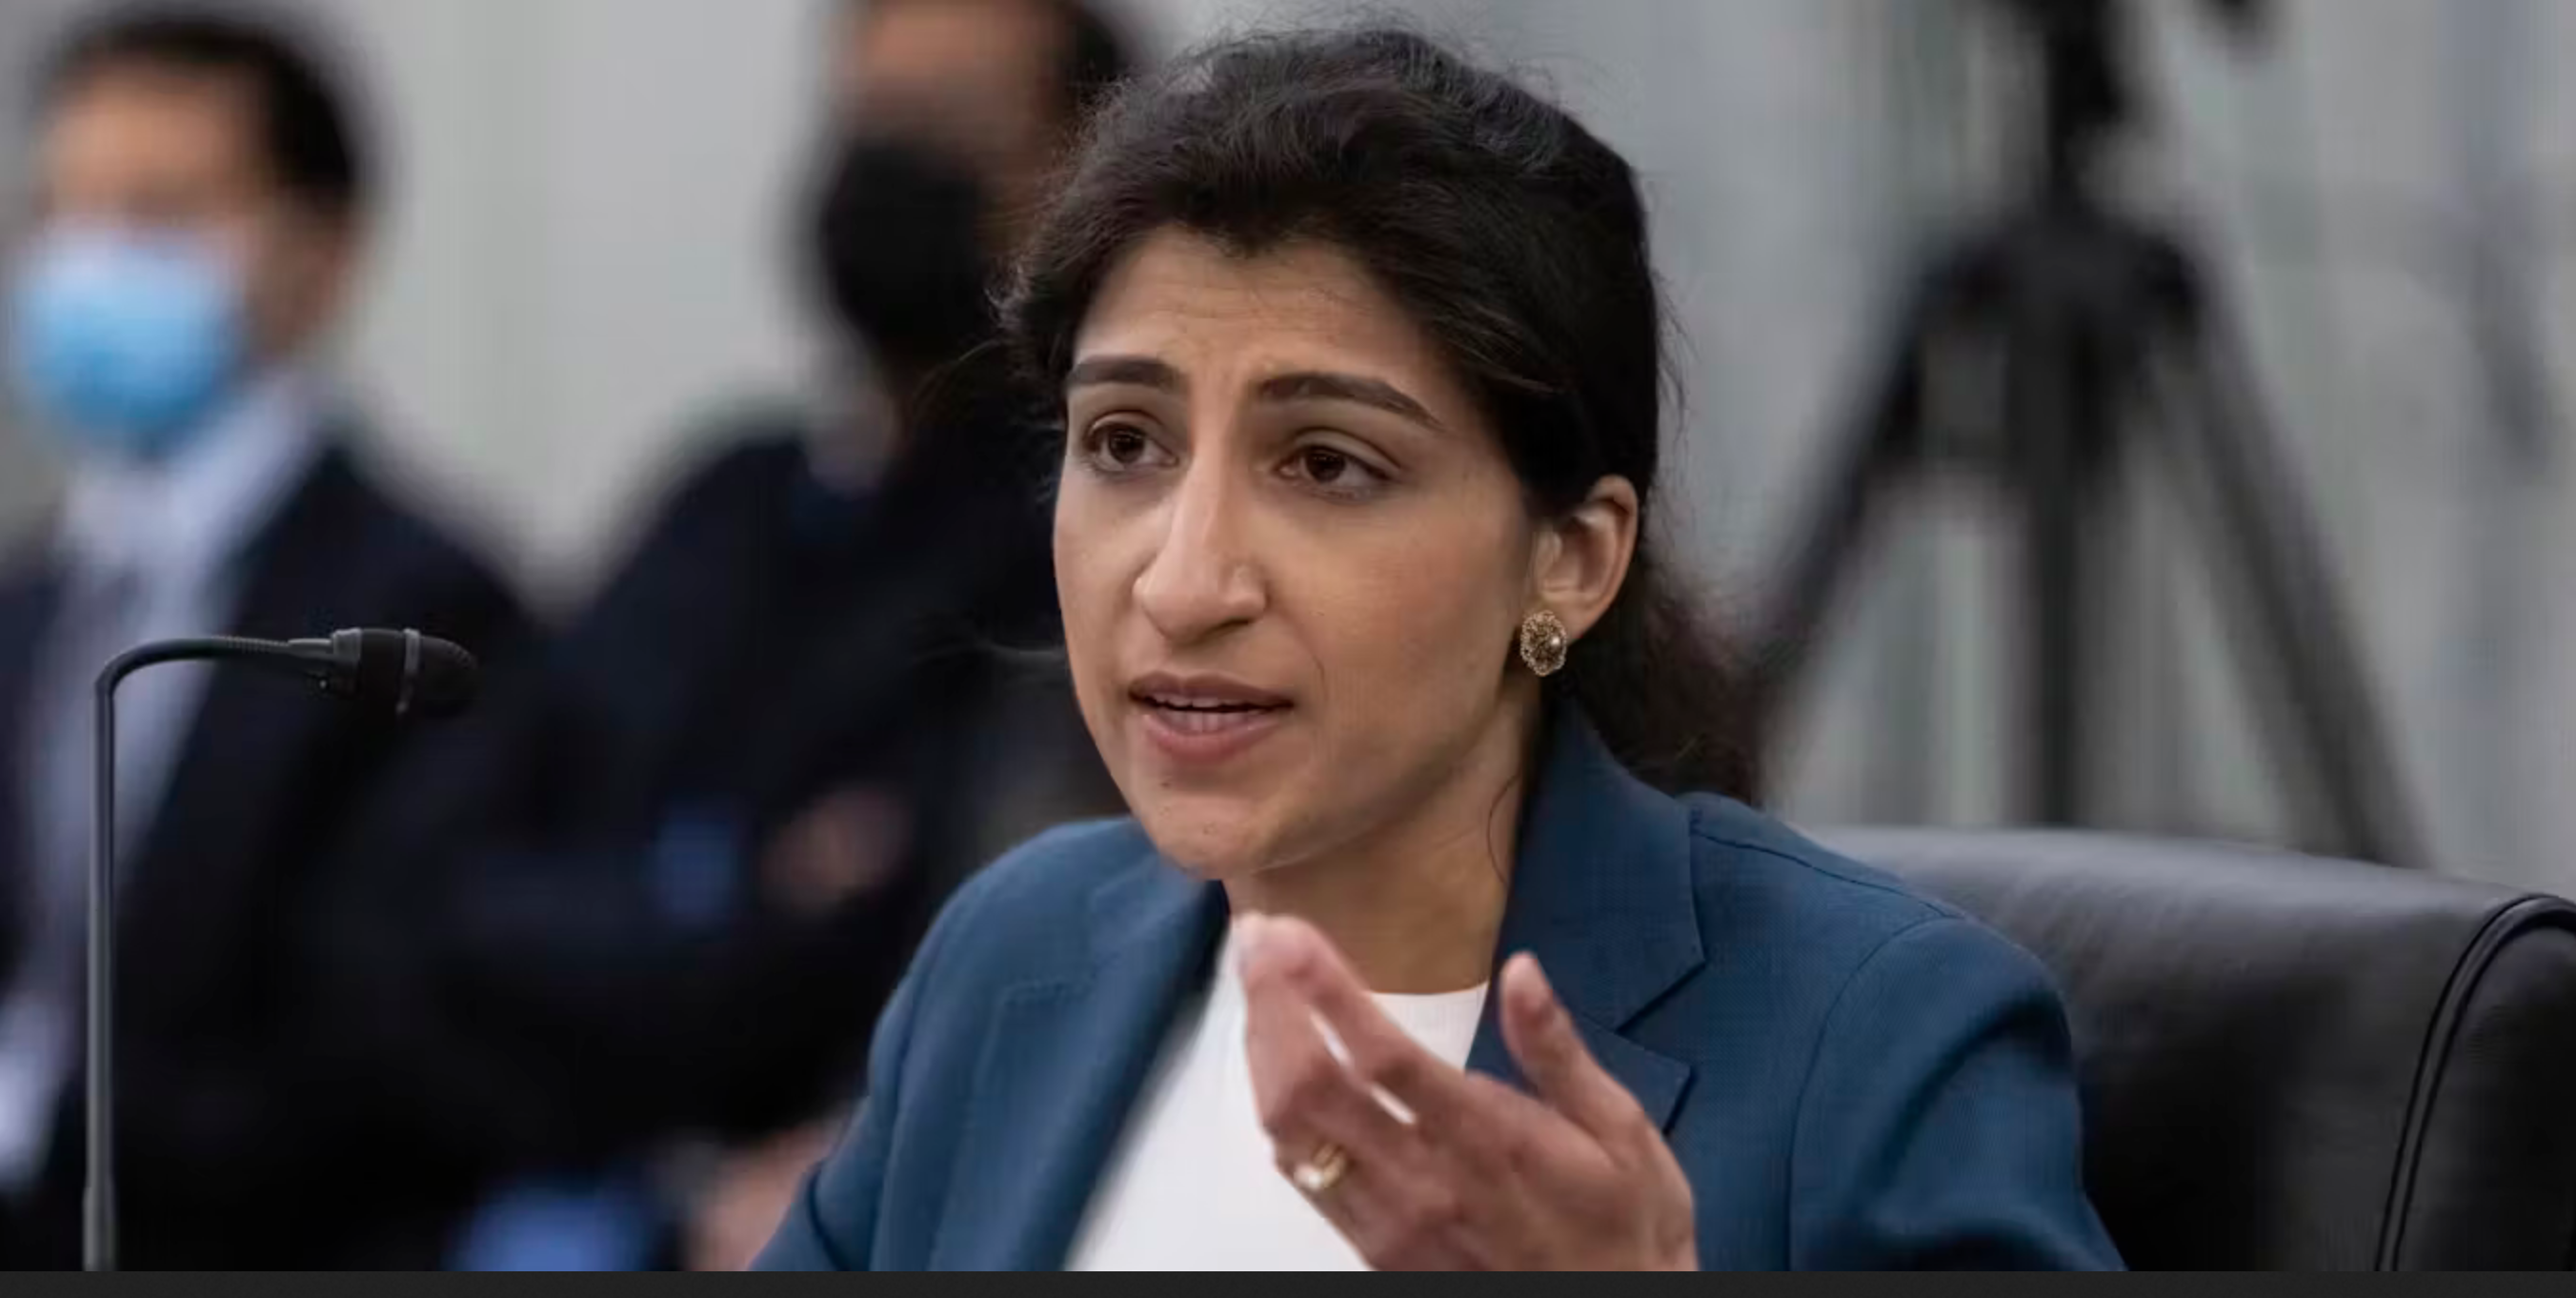 Lina Khan, the Federal Trade Commission’s chair